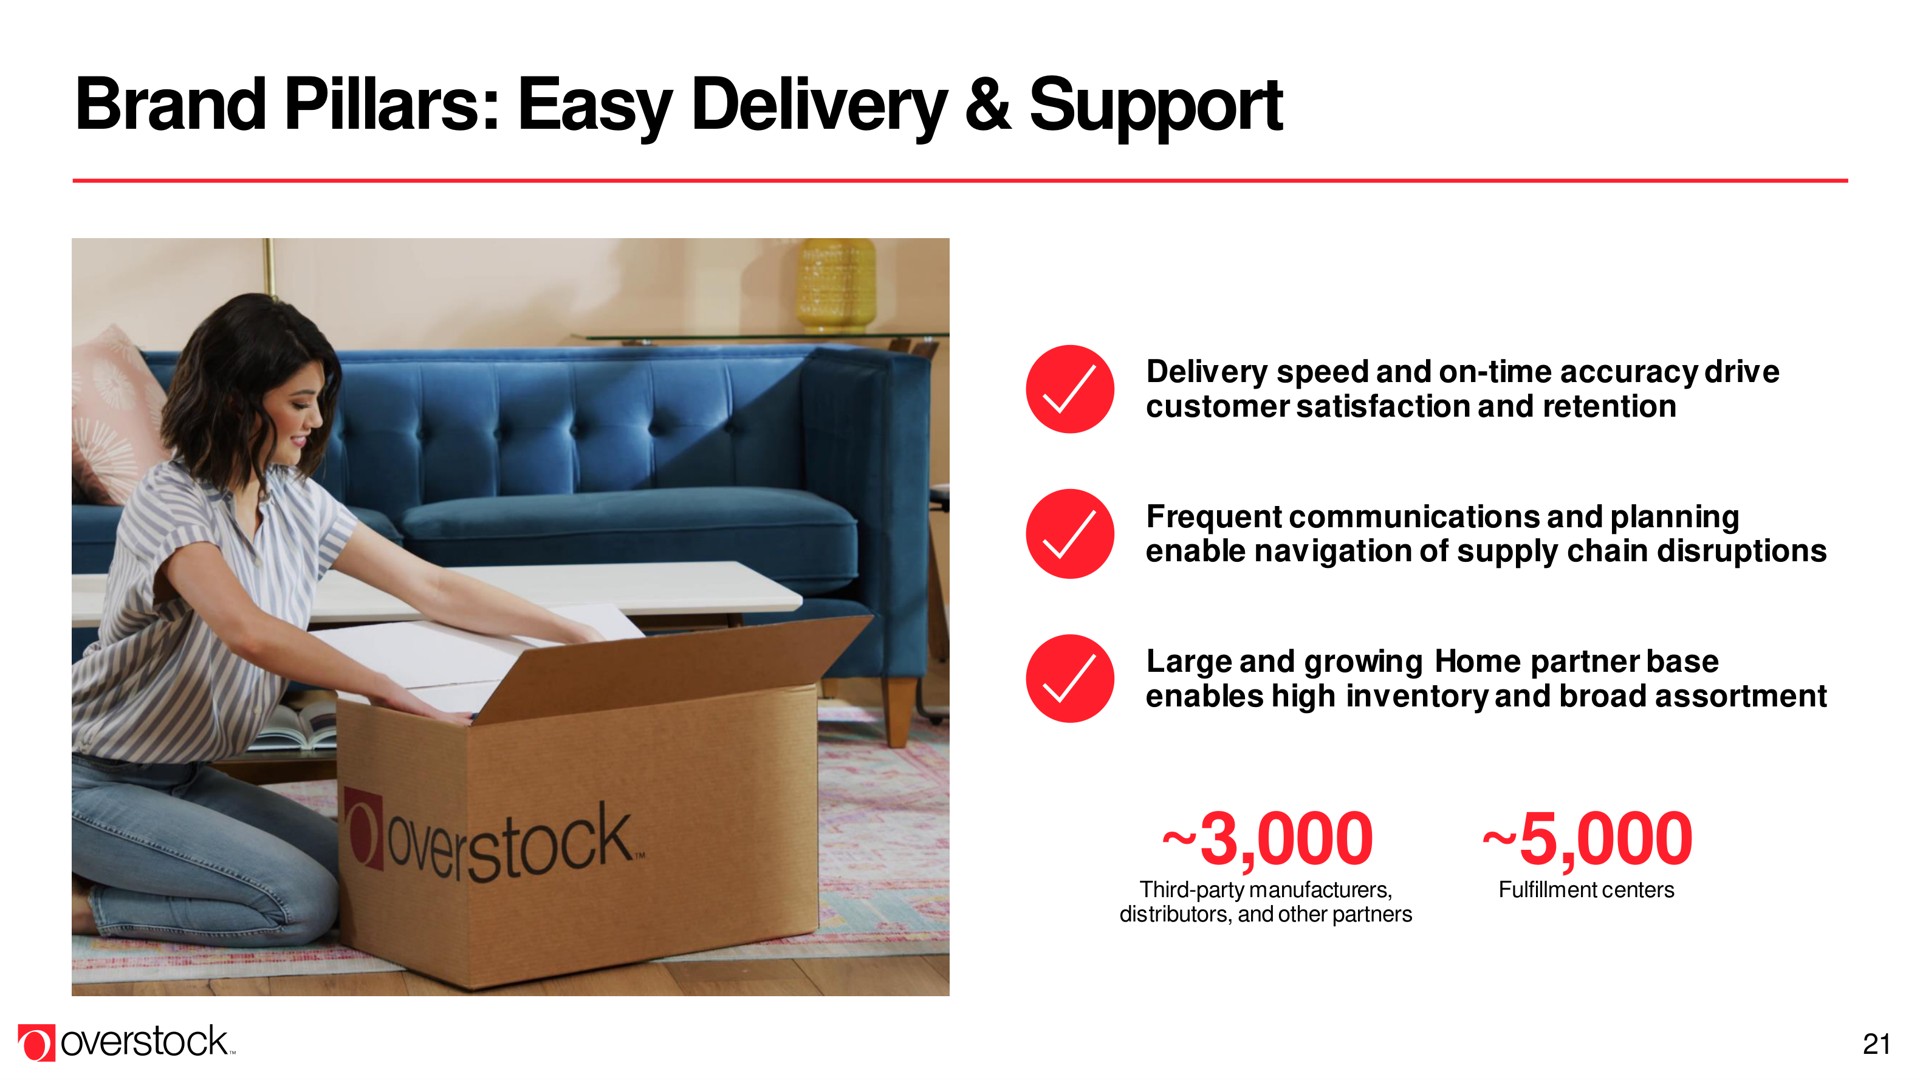 brand pillars easy delivery support | Overstock